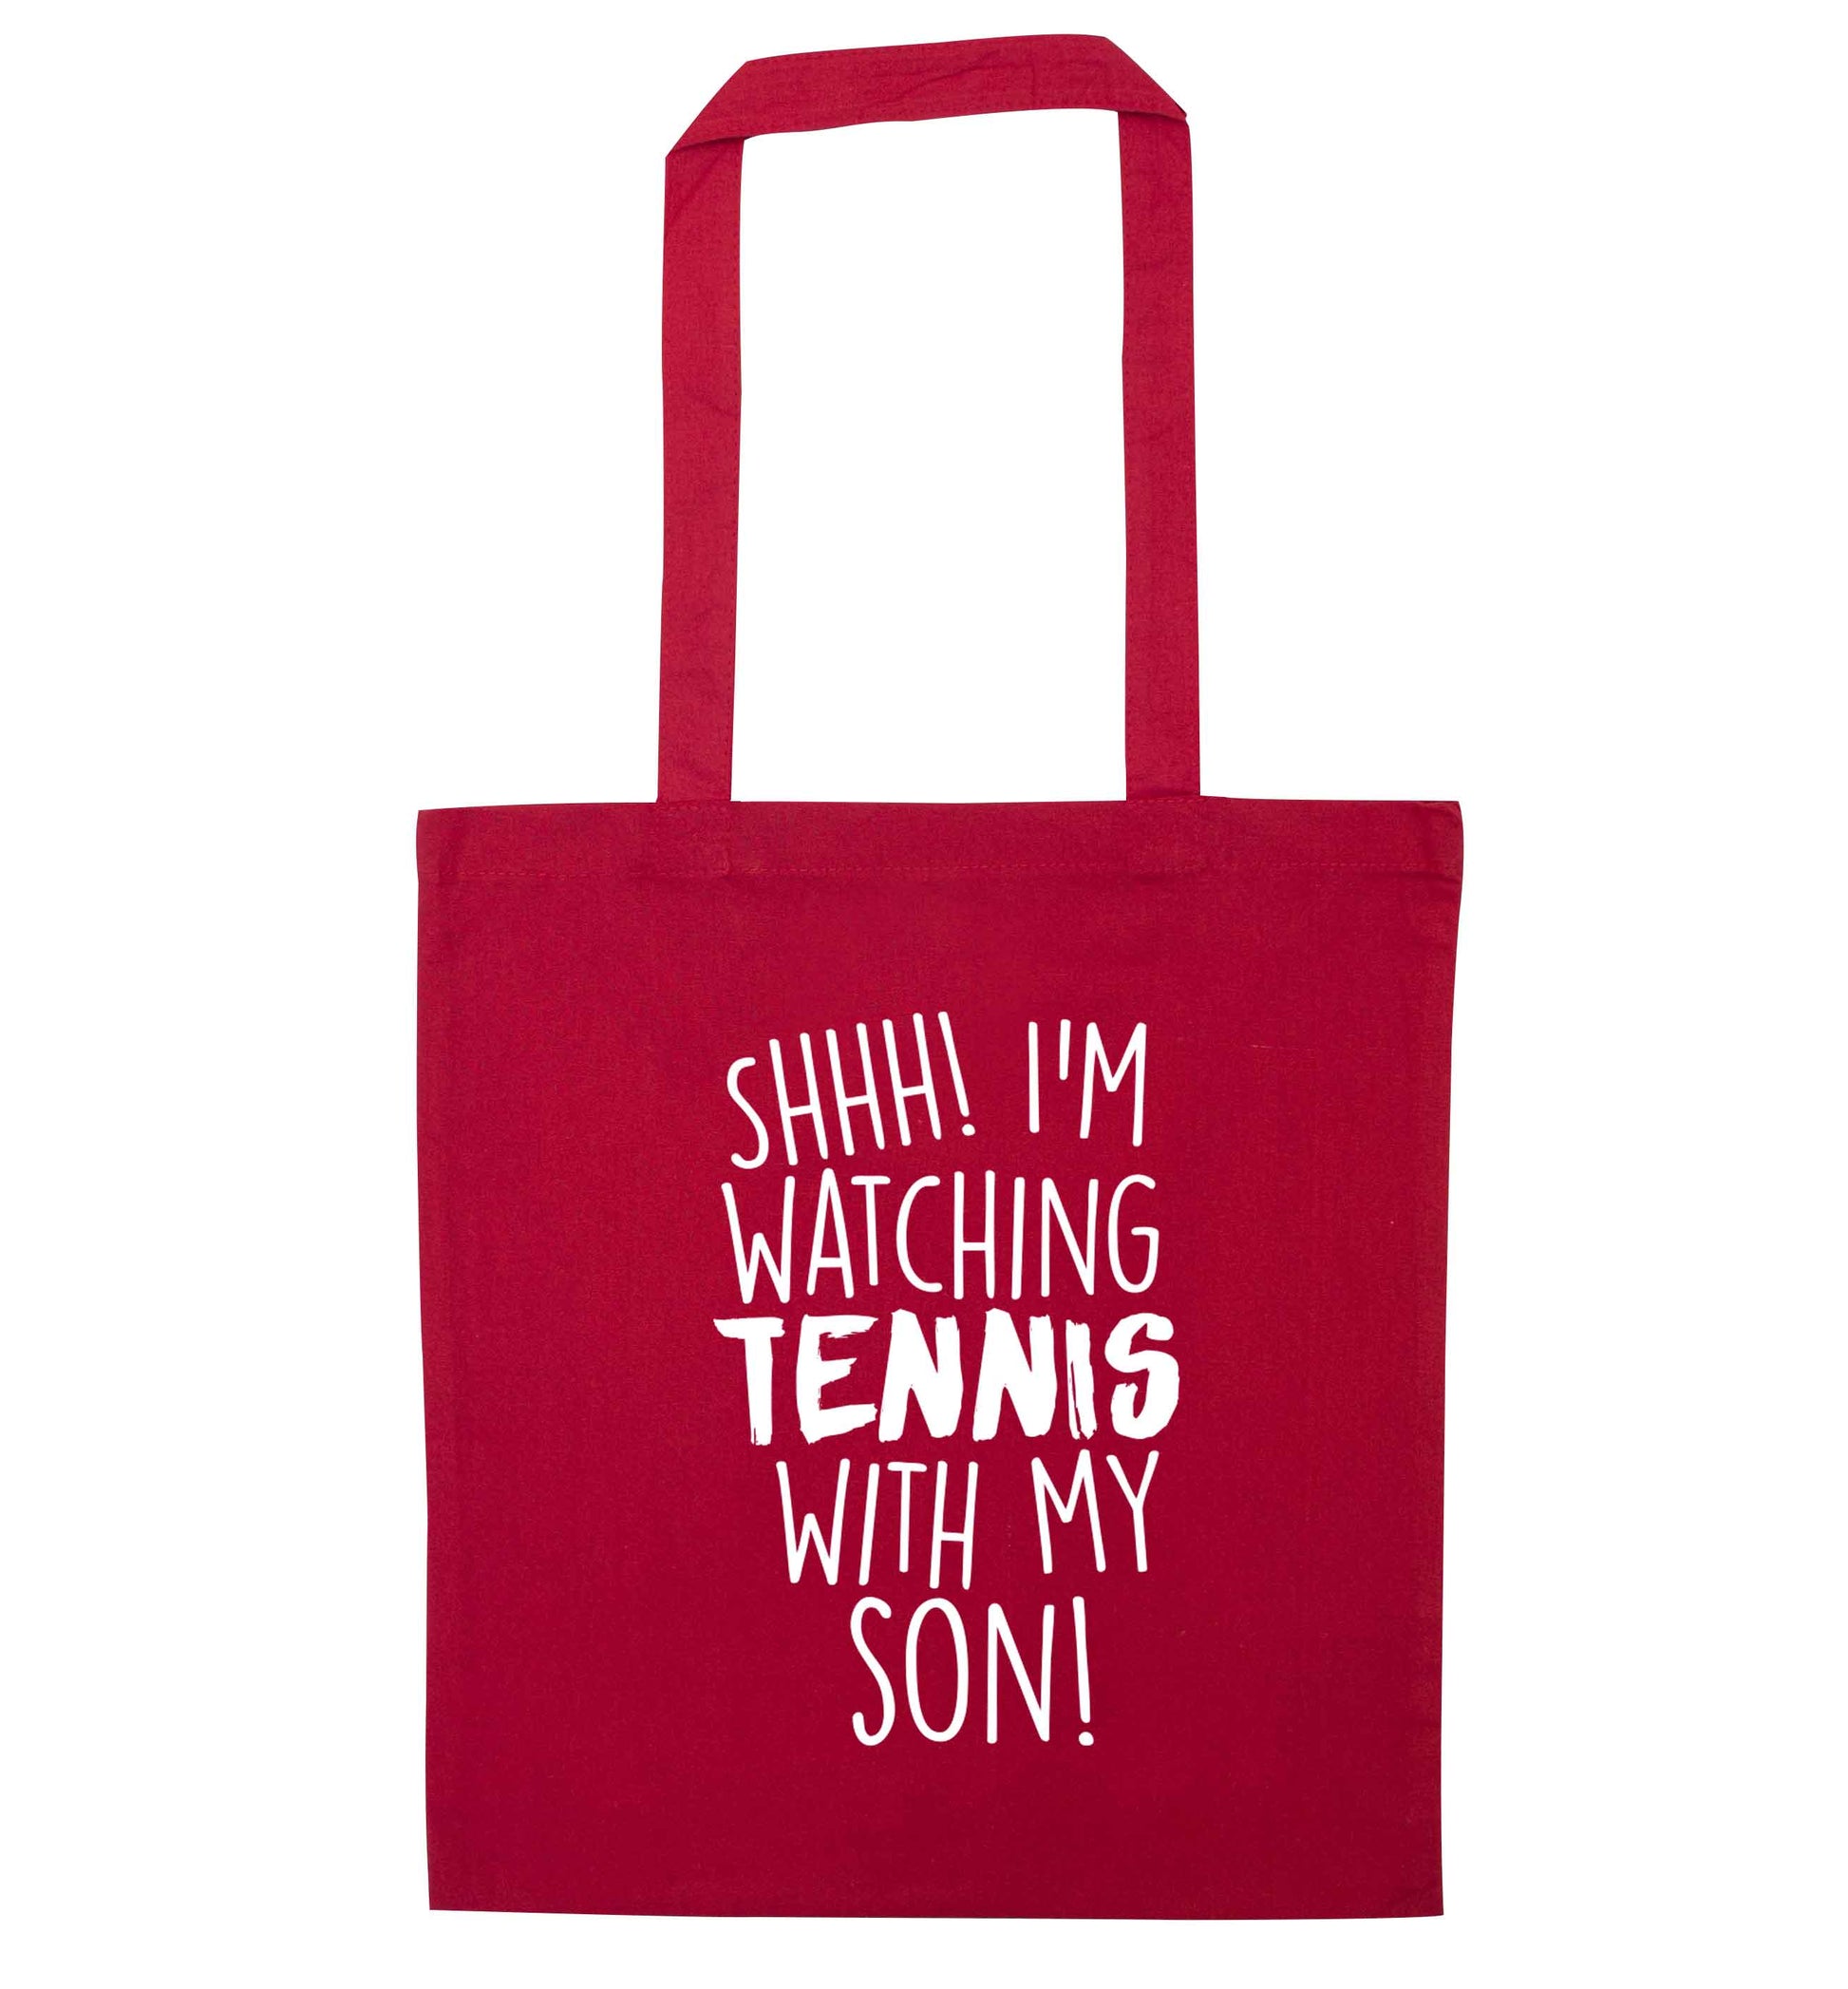 Shh! I'm watching tennis with my son! red tote bag